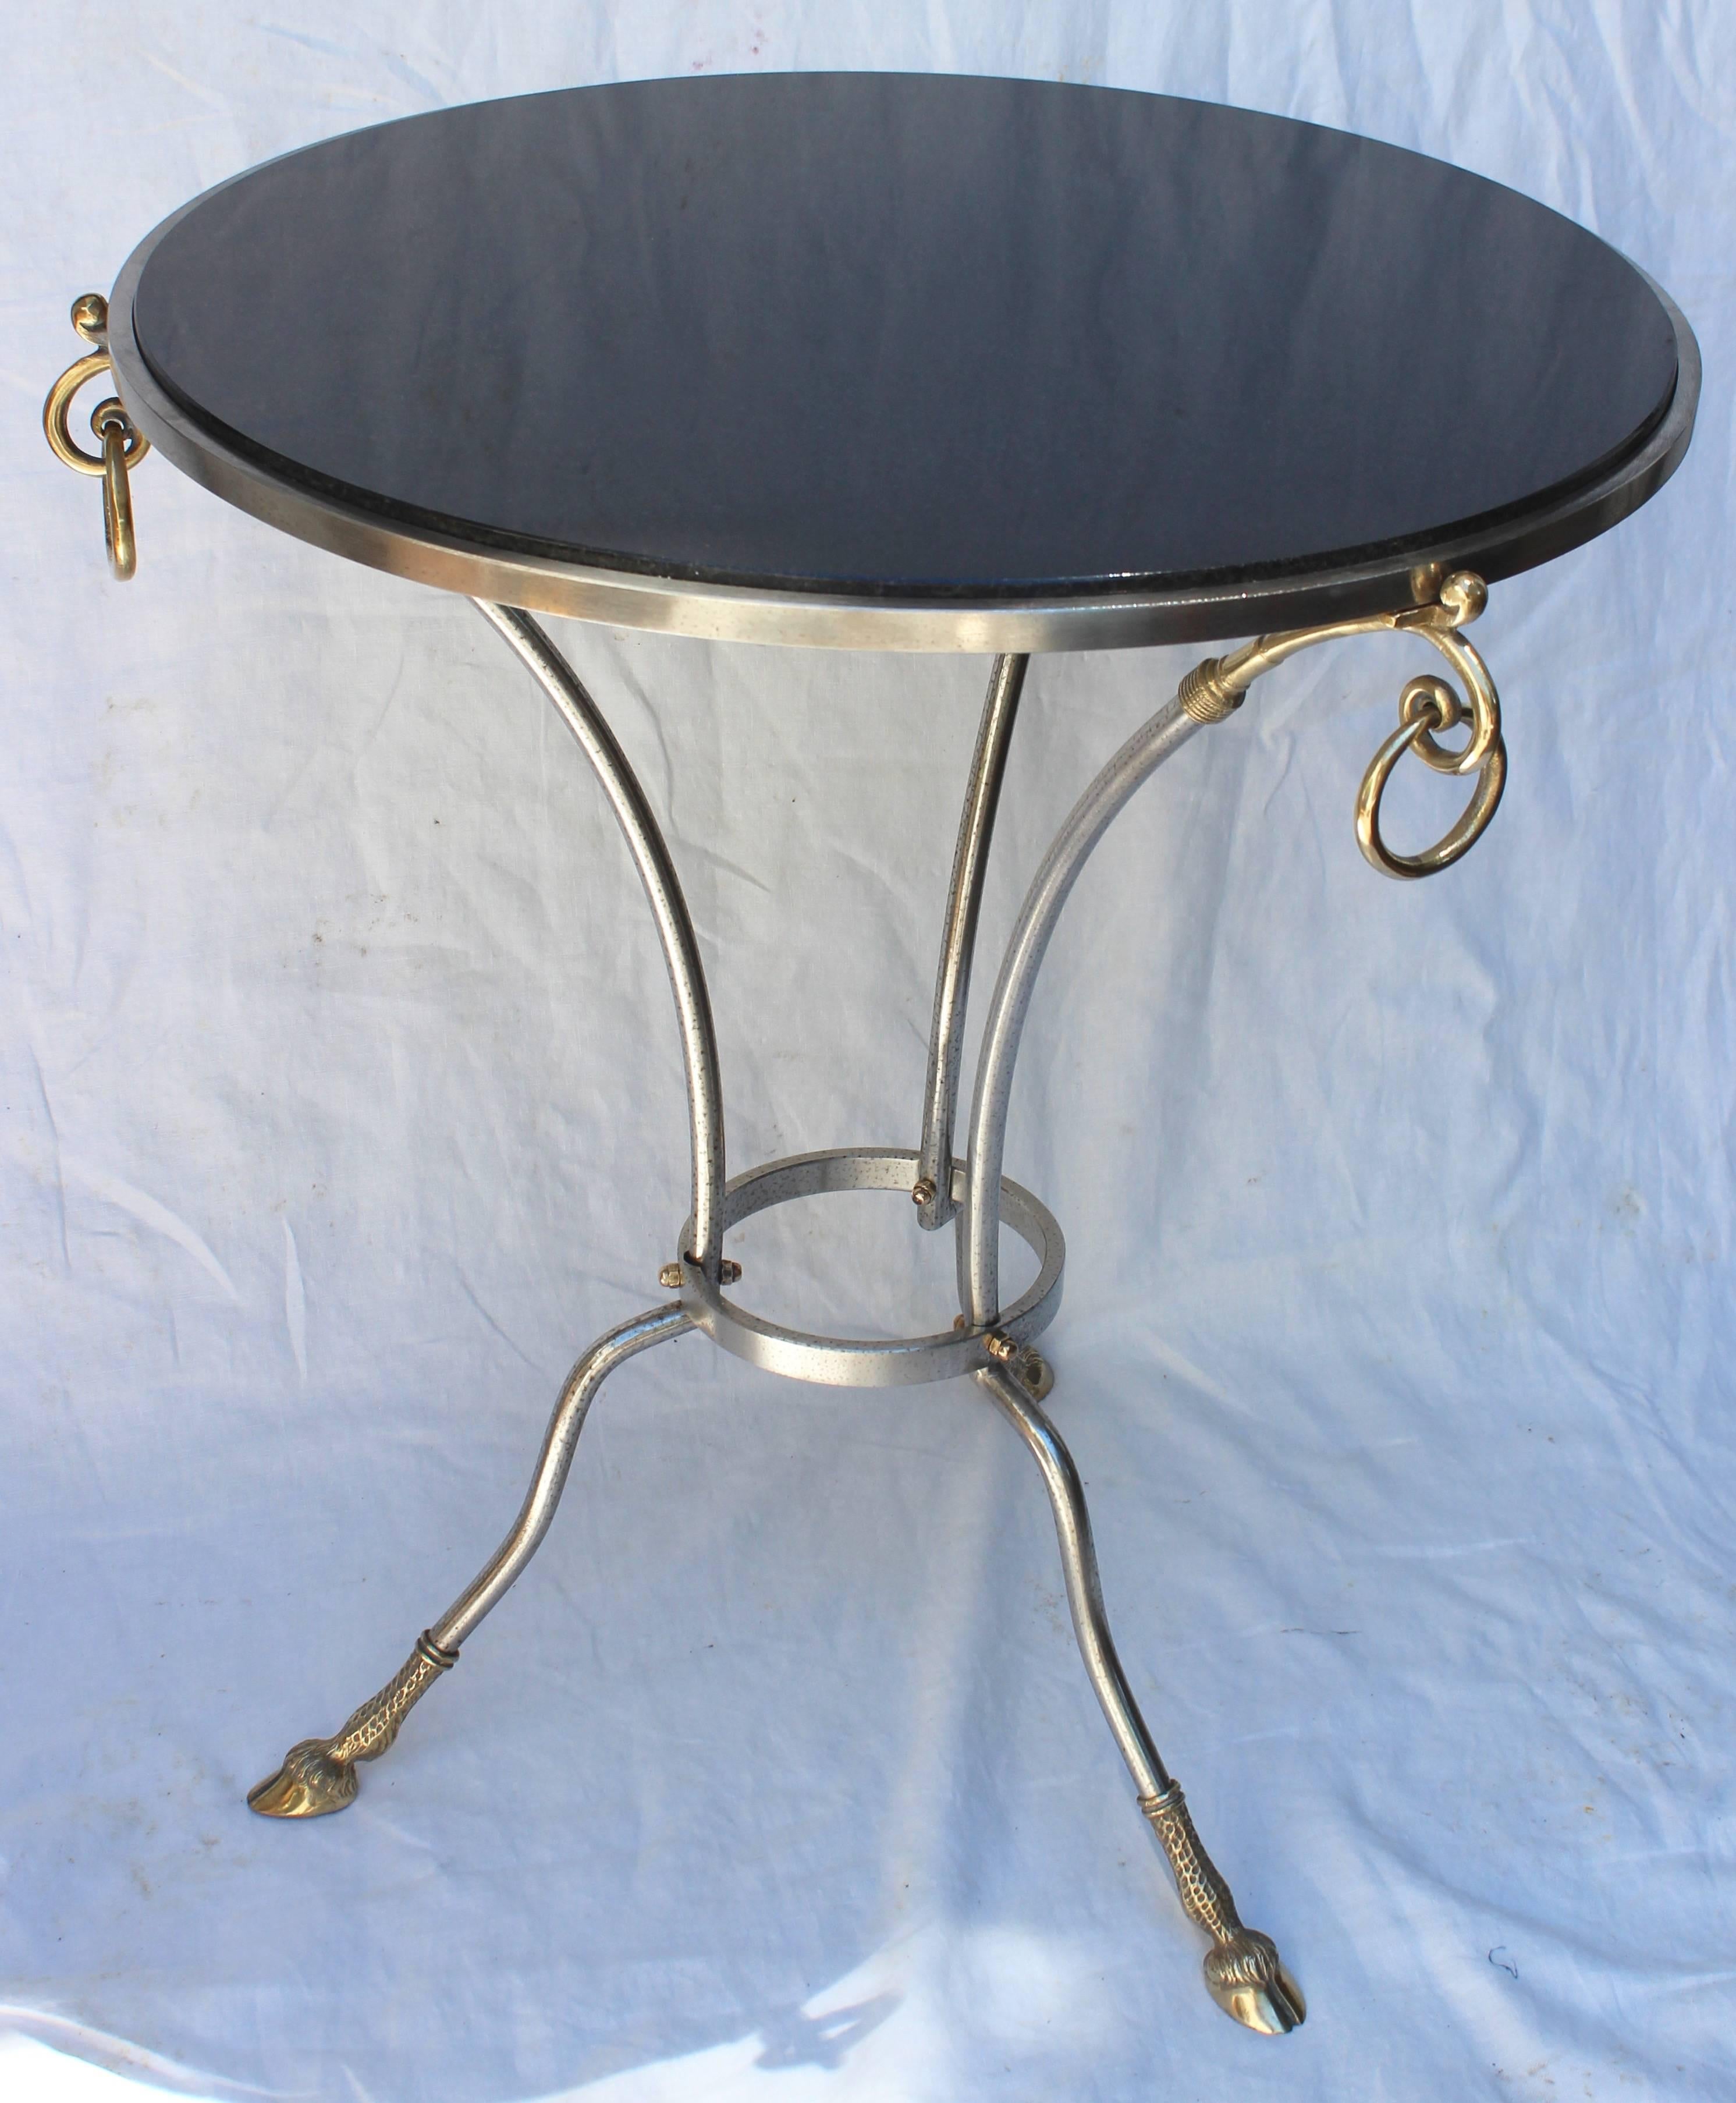 Jansen style round table. Black granite top with metal and brass base and brass rings.

tabletop measures 23.5